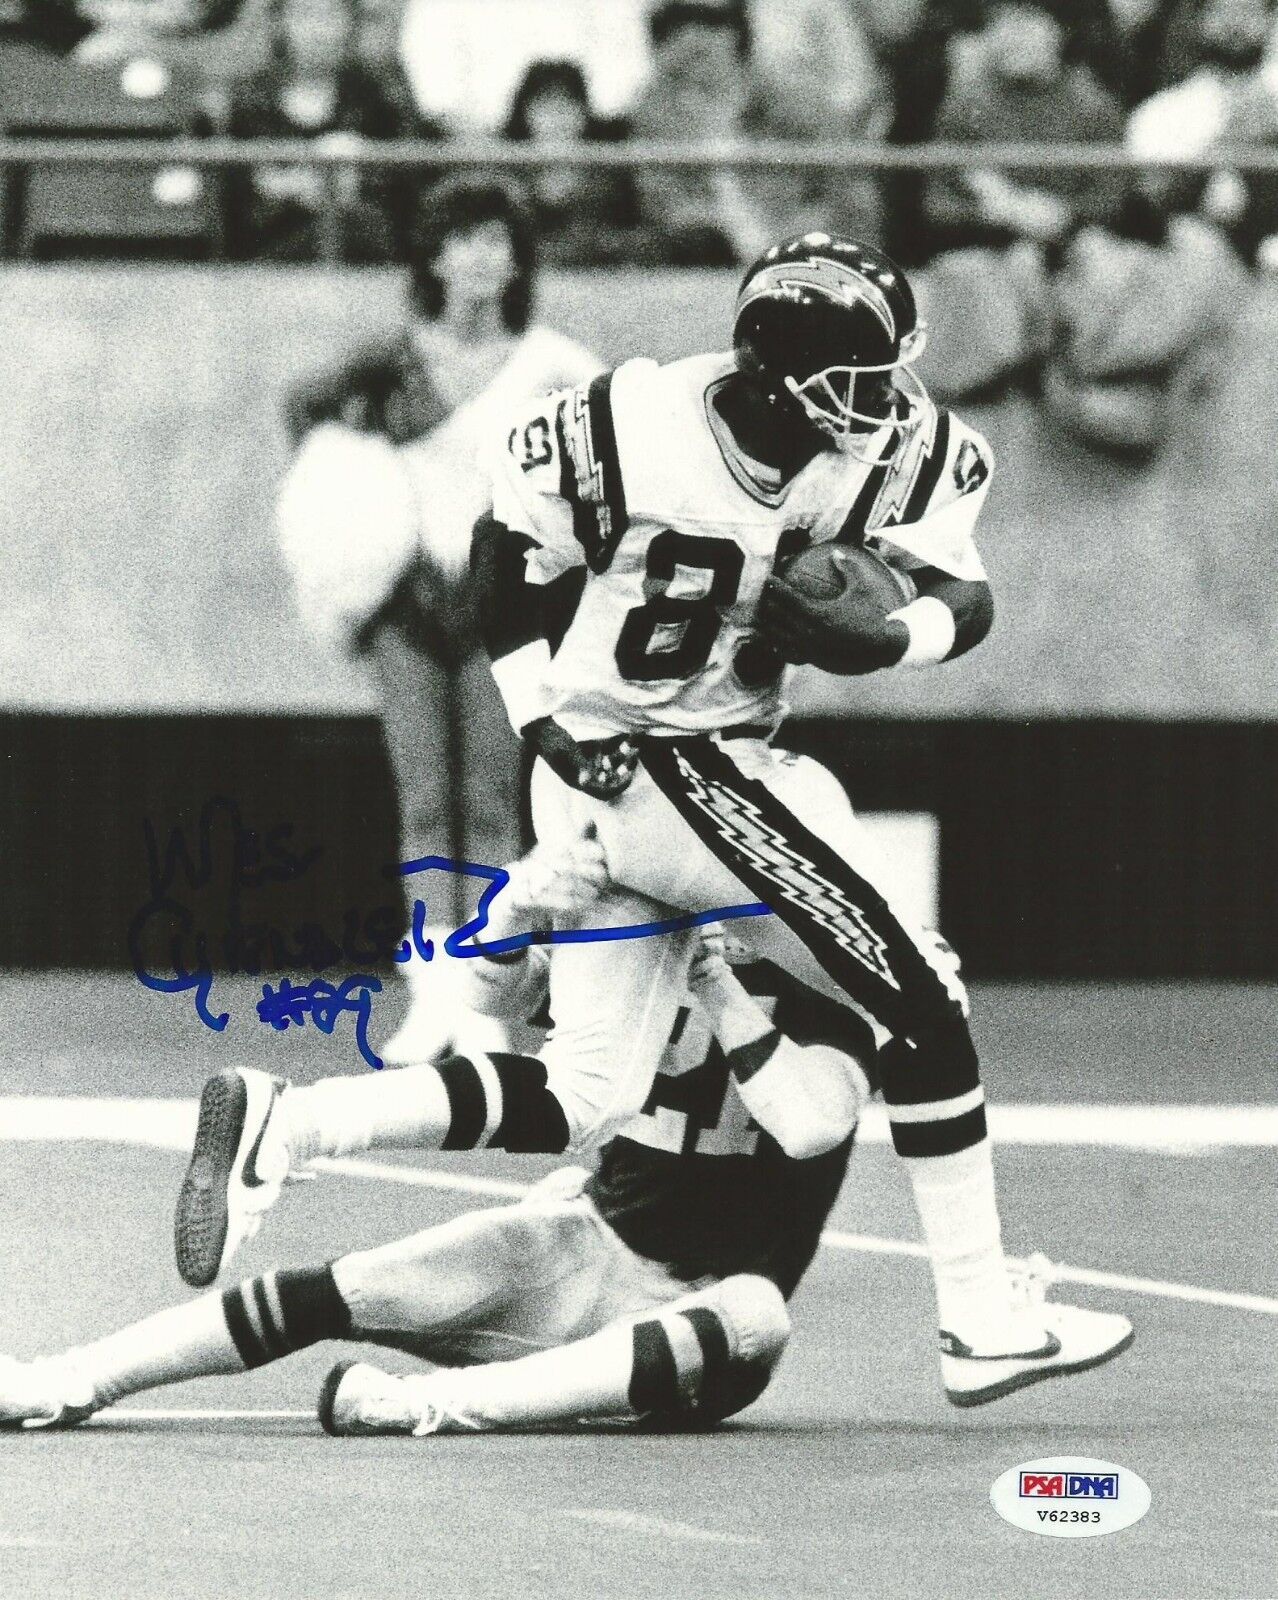 Wes Chandler Signed Chargers 8x10 Photo Poster painting PSA/DNA COA Picture Auto'd Air Coryell 4